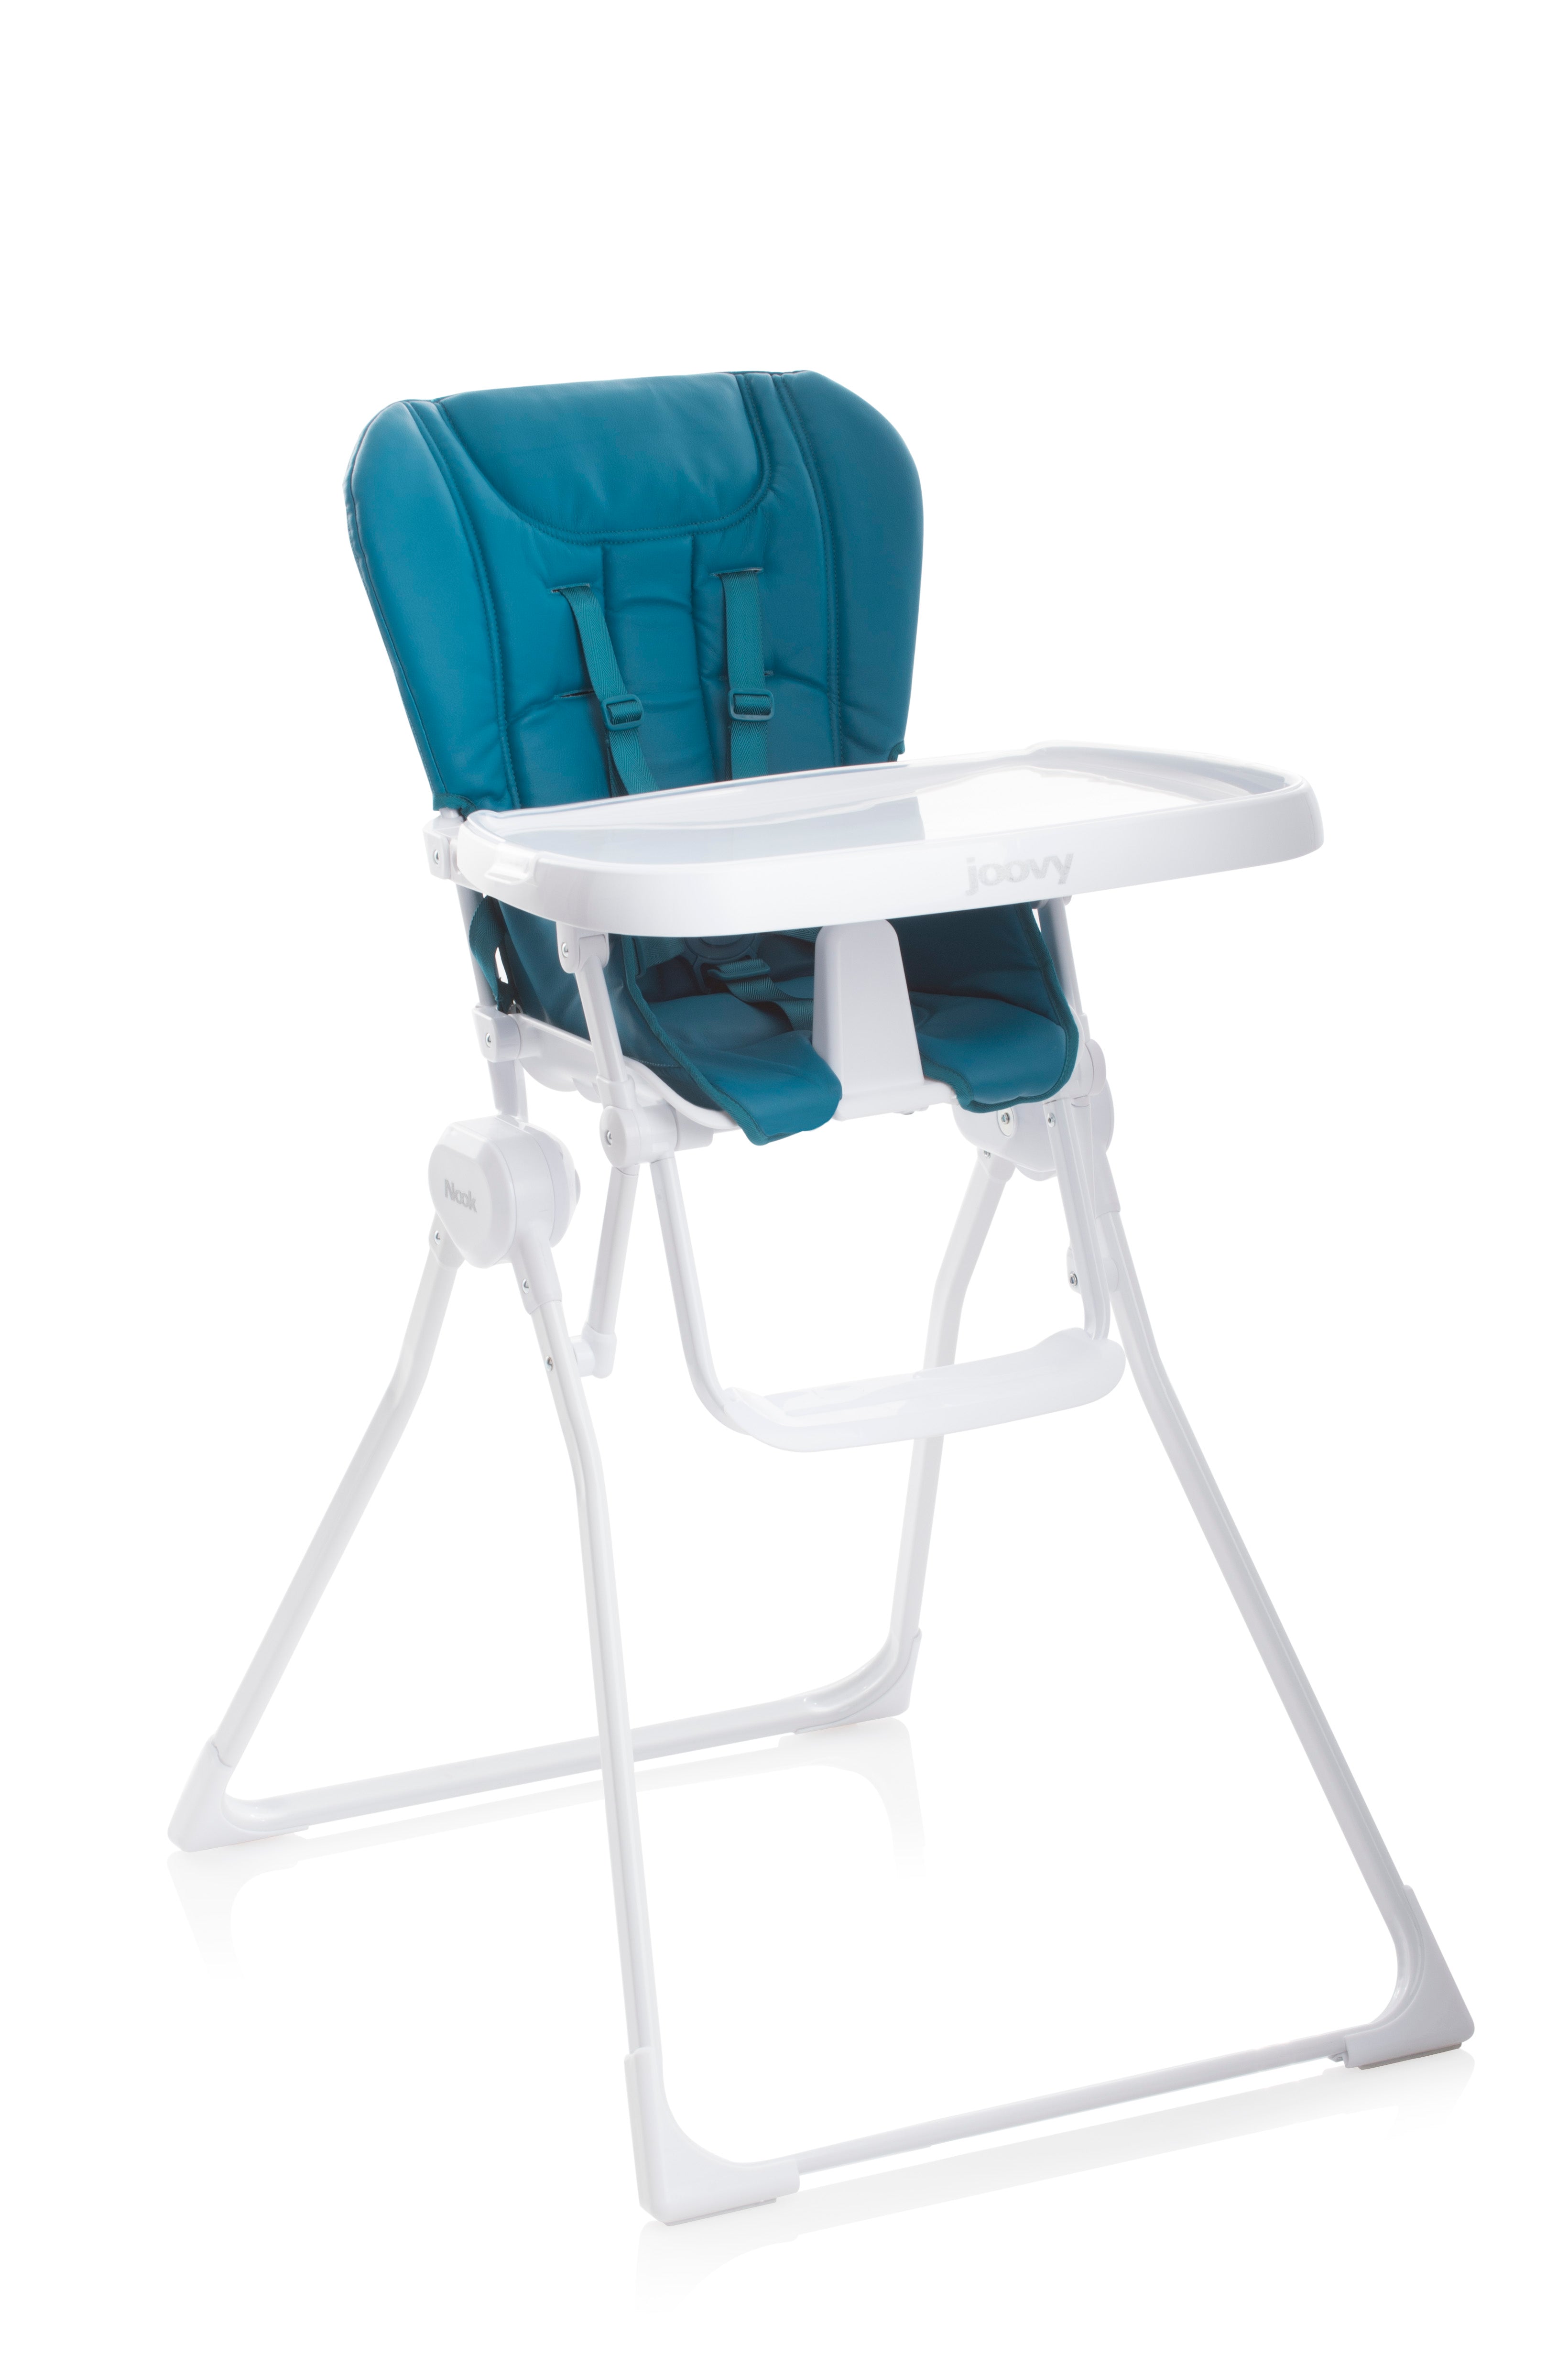 Joovy Nook High Chair Compact Fold Swing Open Tray